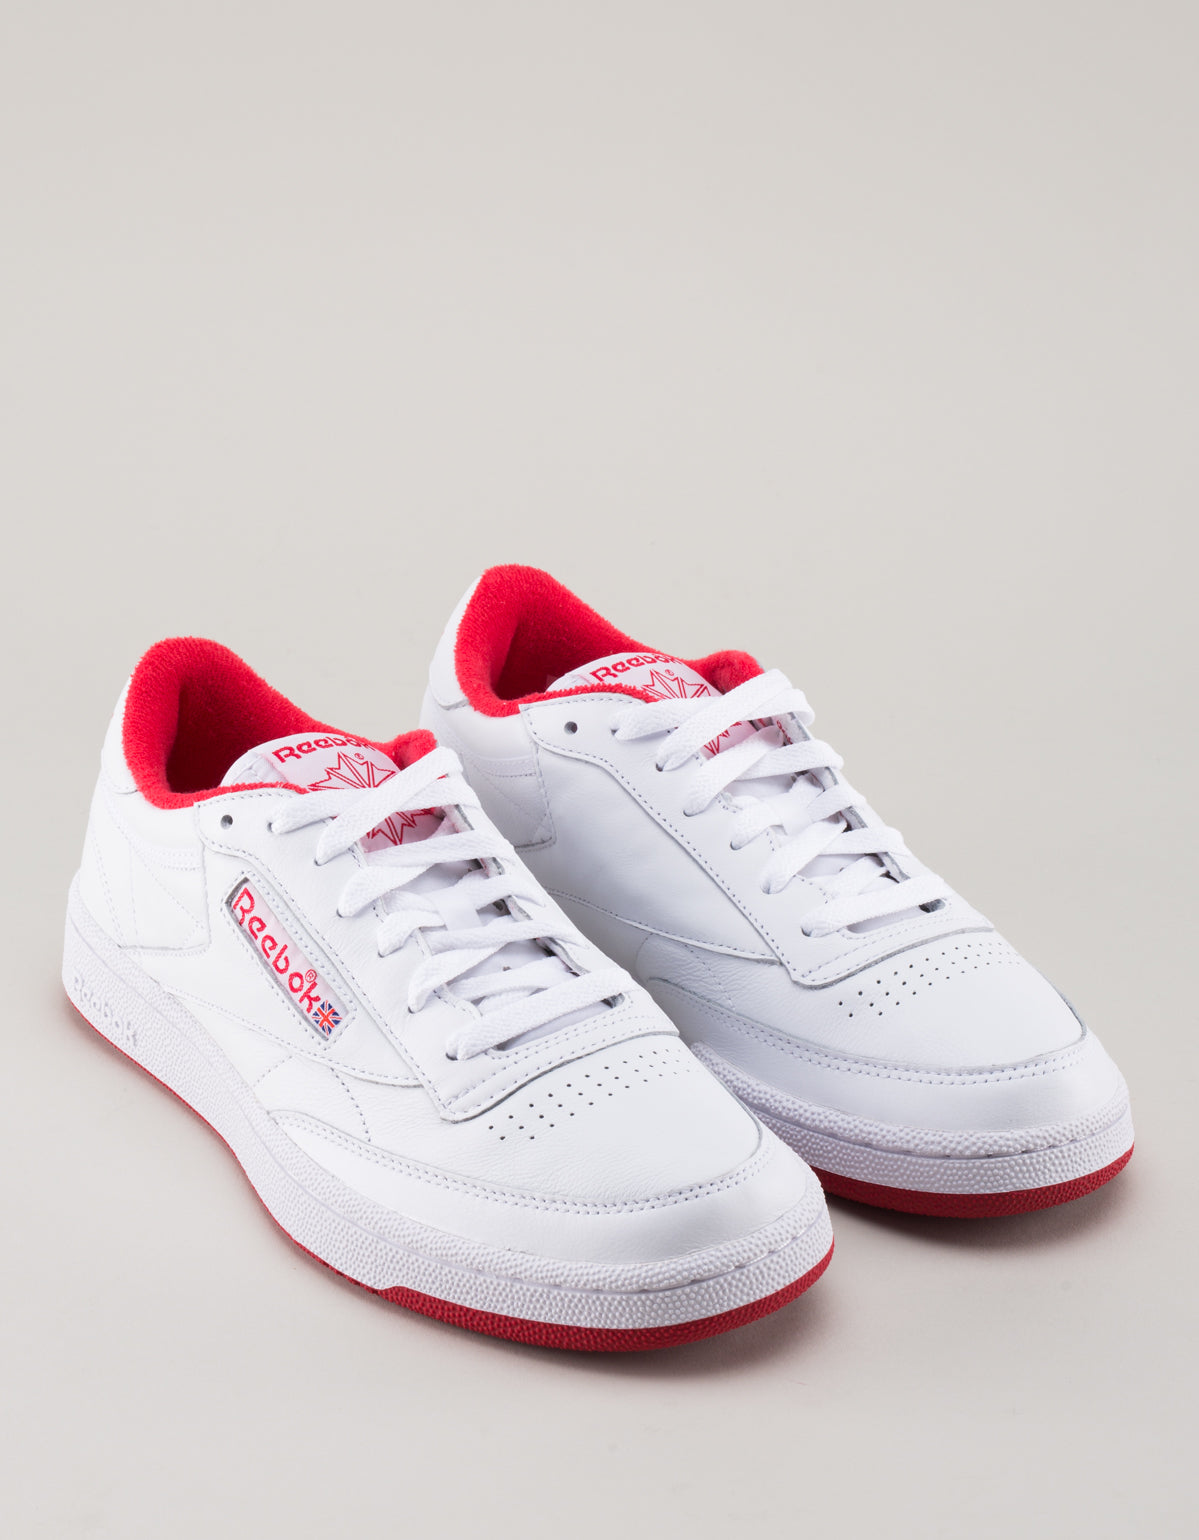 Selling - reebok white and red - OFF 70 